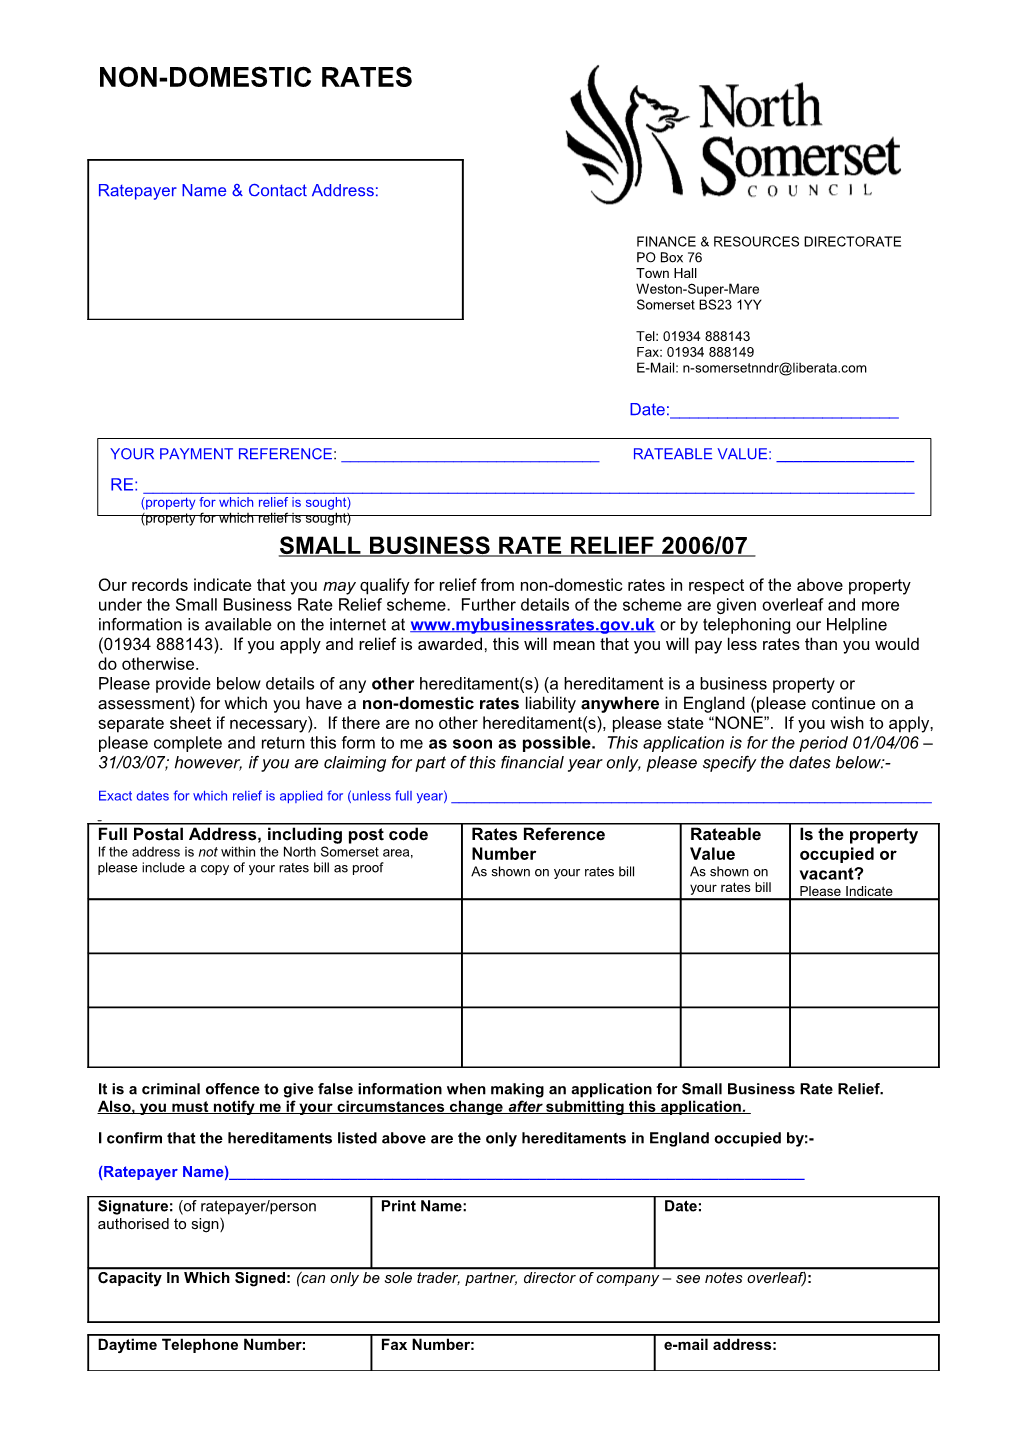 Small Business Rate Relief 2006/07